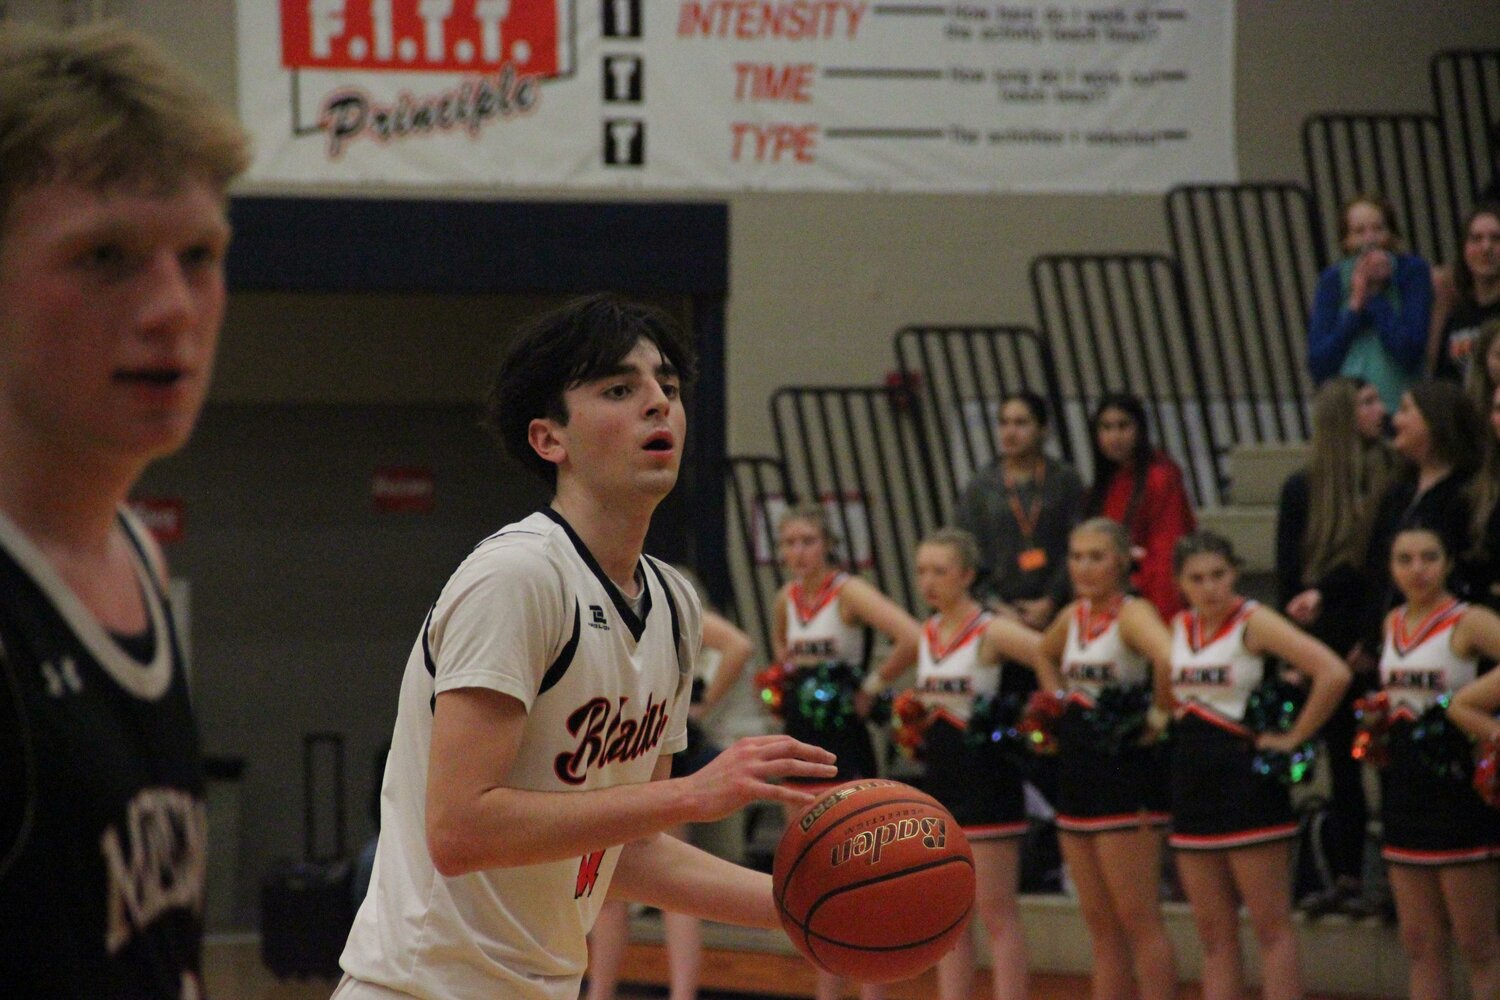 Blaine junior guard Landon Melton eyes his shot before attempting a free throw in the second quarter of Blaine’s play-in game against Mount Baker. Melton tied Noah Tavis for a team-high nine points on the night.